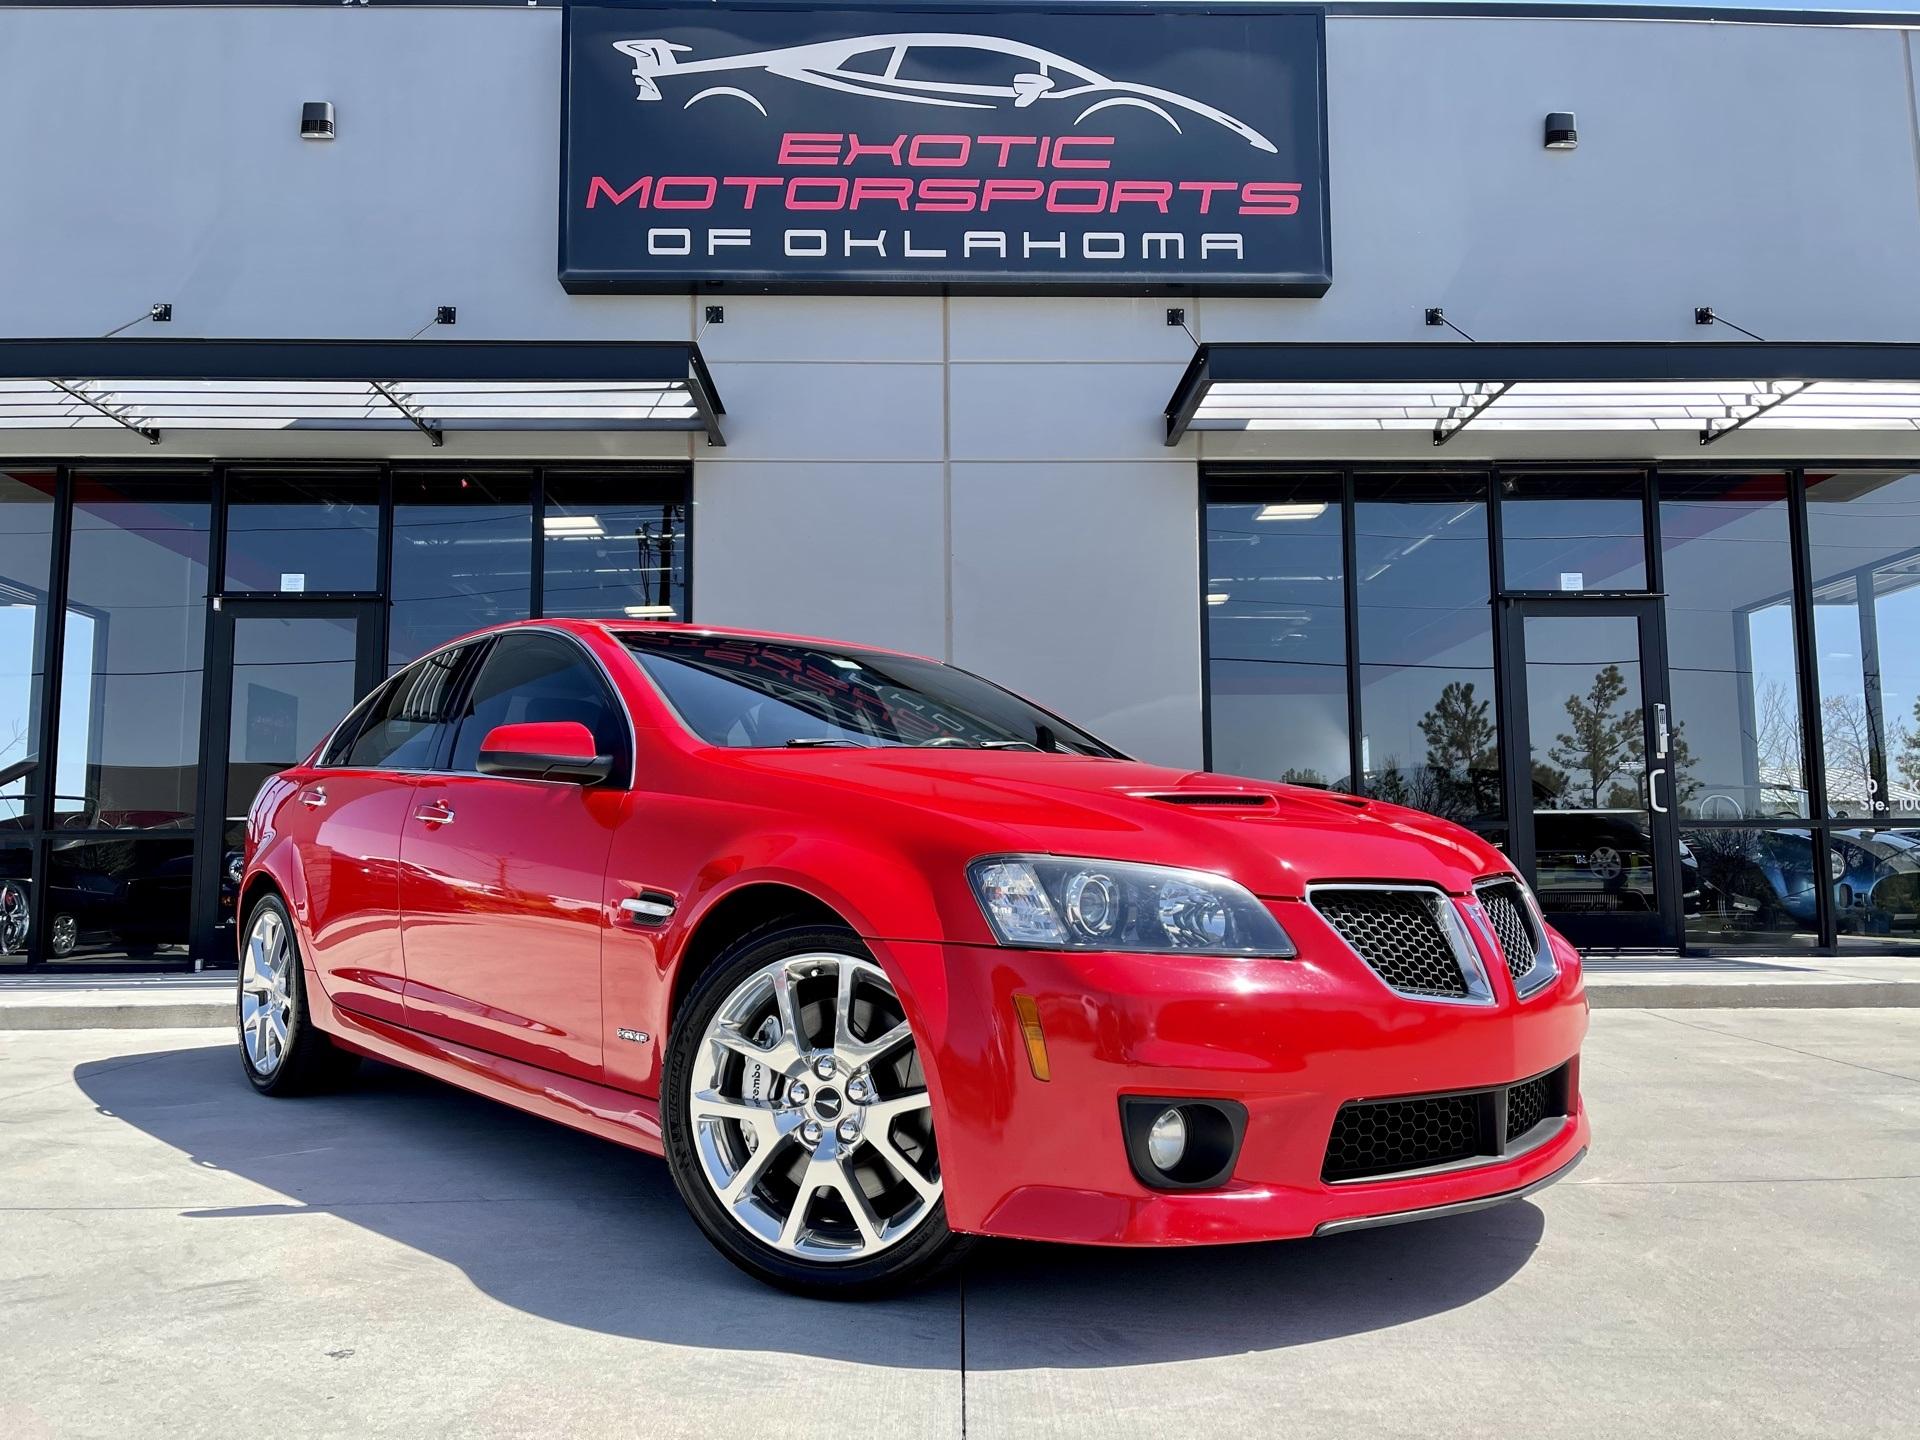 Used 2009 Pontiac G8 GXP For Sale Sold Exotic Motorsports of 